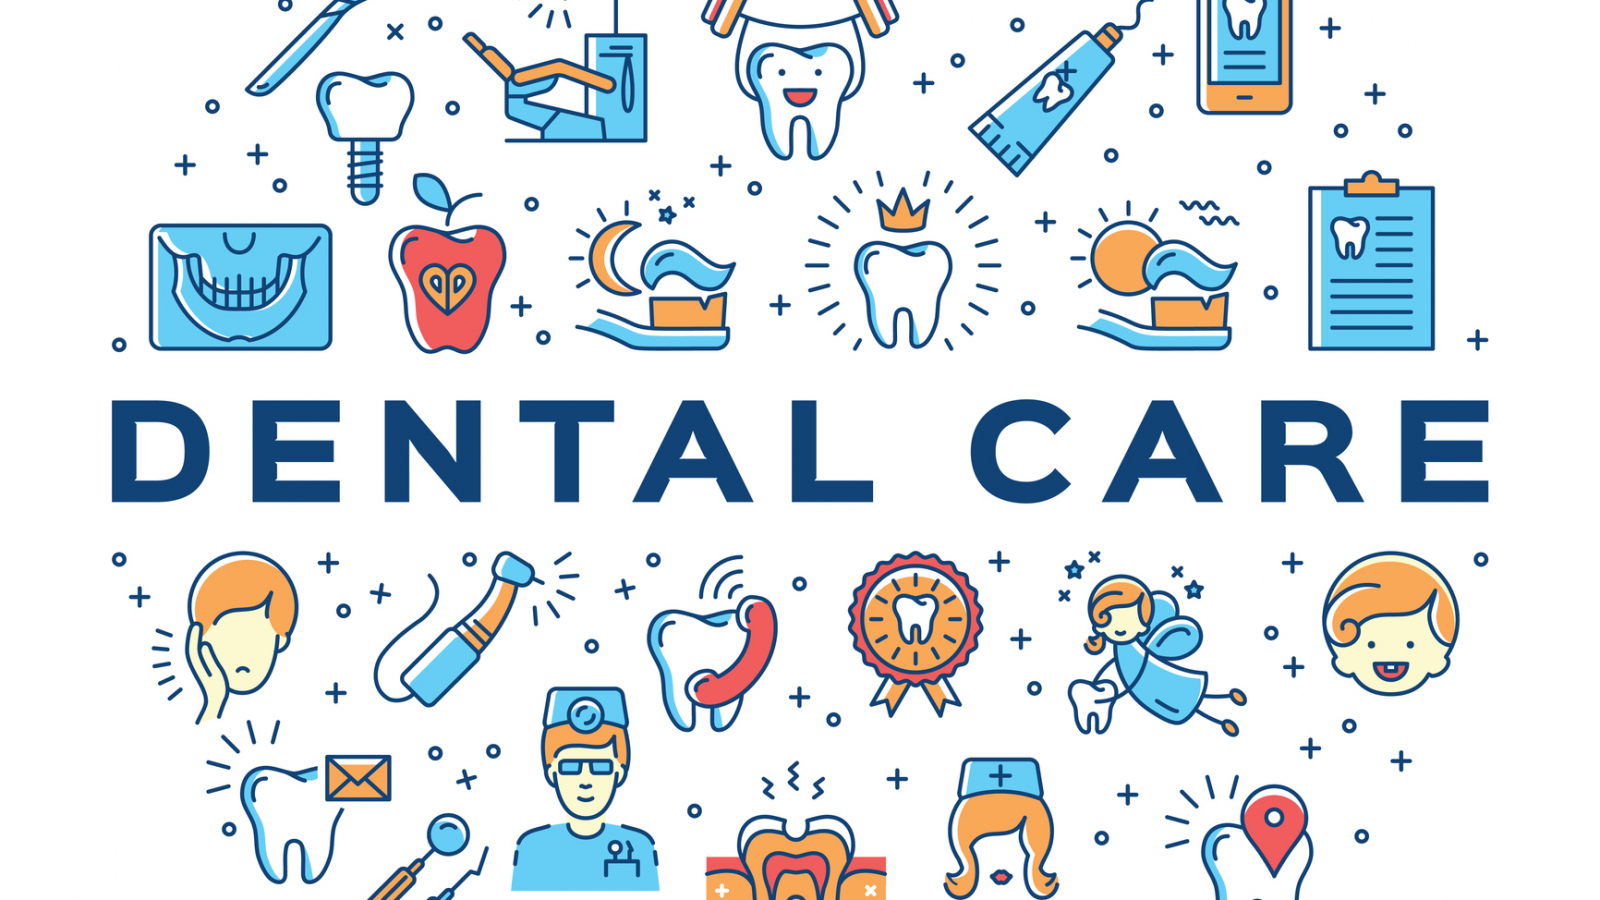 Dental care circle infographics Stomatology icon. Colorful dentistry thin line art icons. Symbols teeth, dentist, smile, caries, implant, office. Vector outline elements